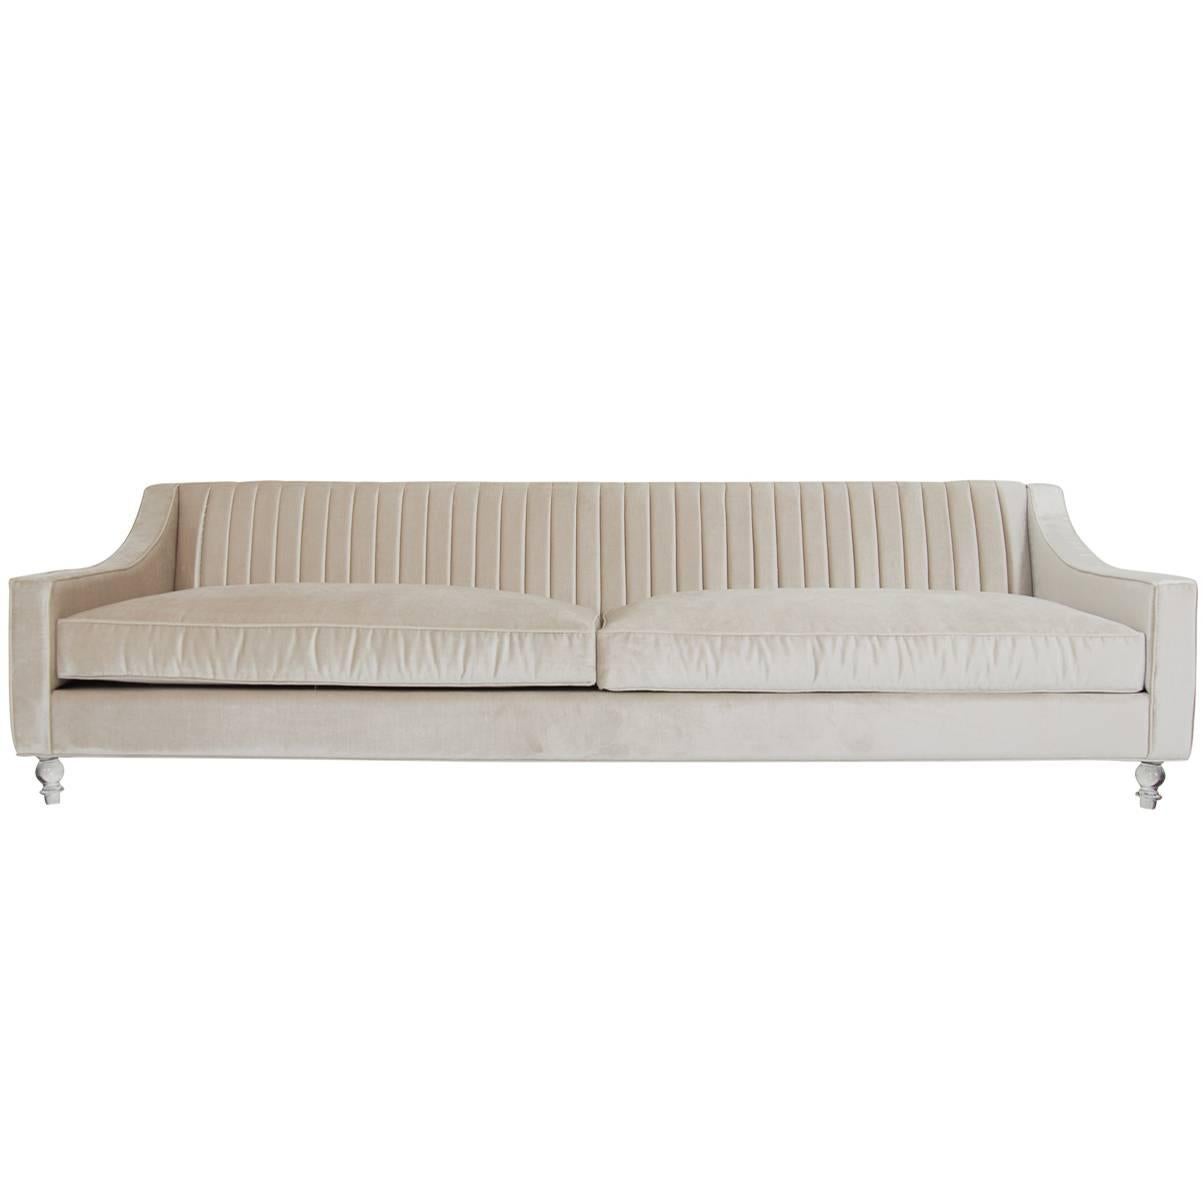 Modern Style Audrey Sofa in Long-Arm Tufted Beige Cashmere Velvet w/ Lucite Legs For Sale